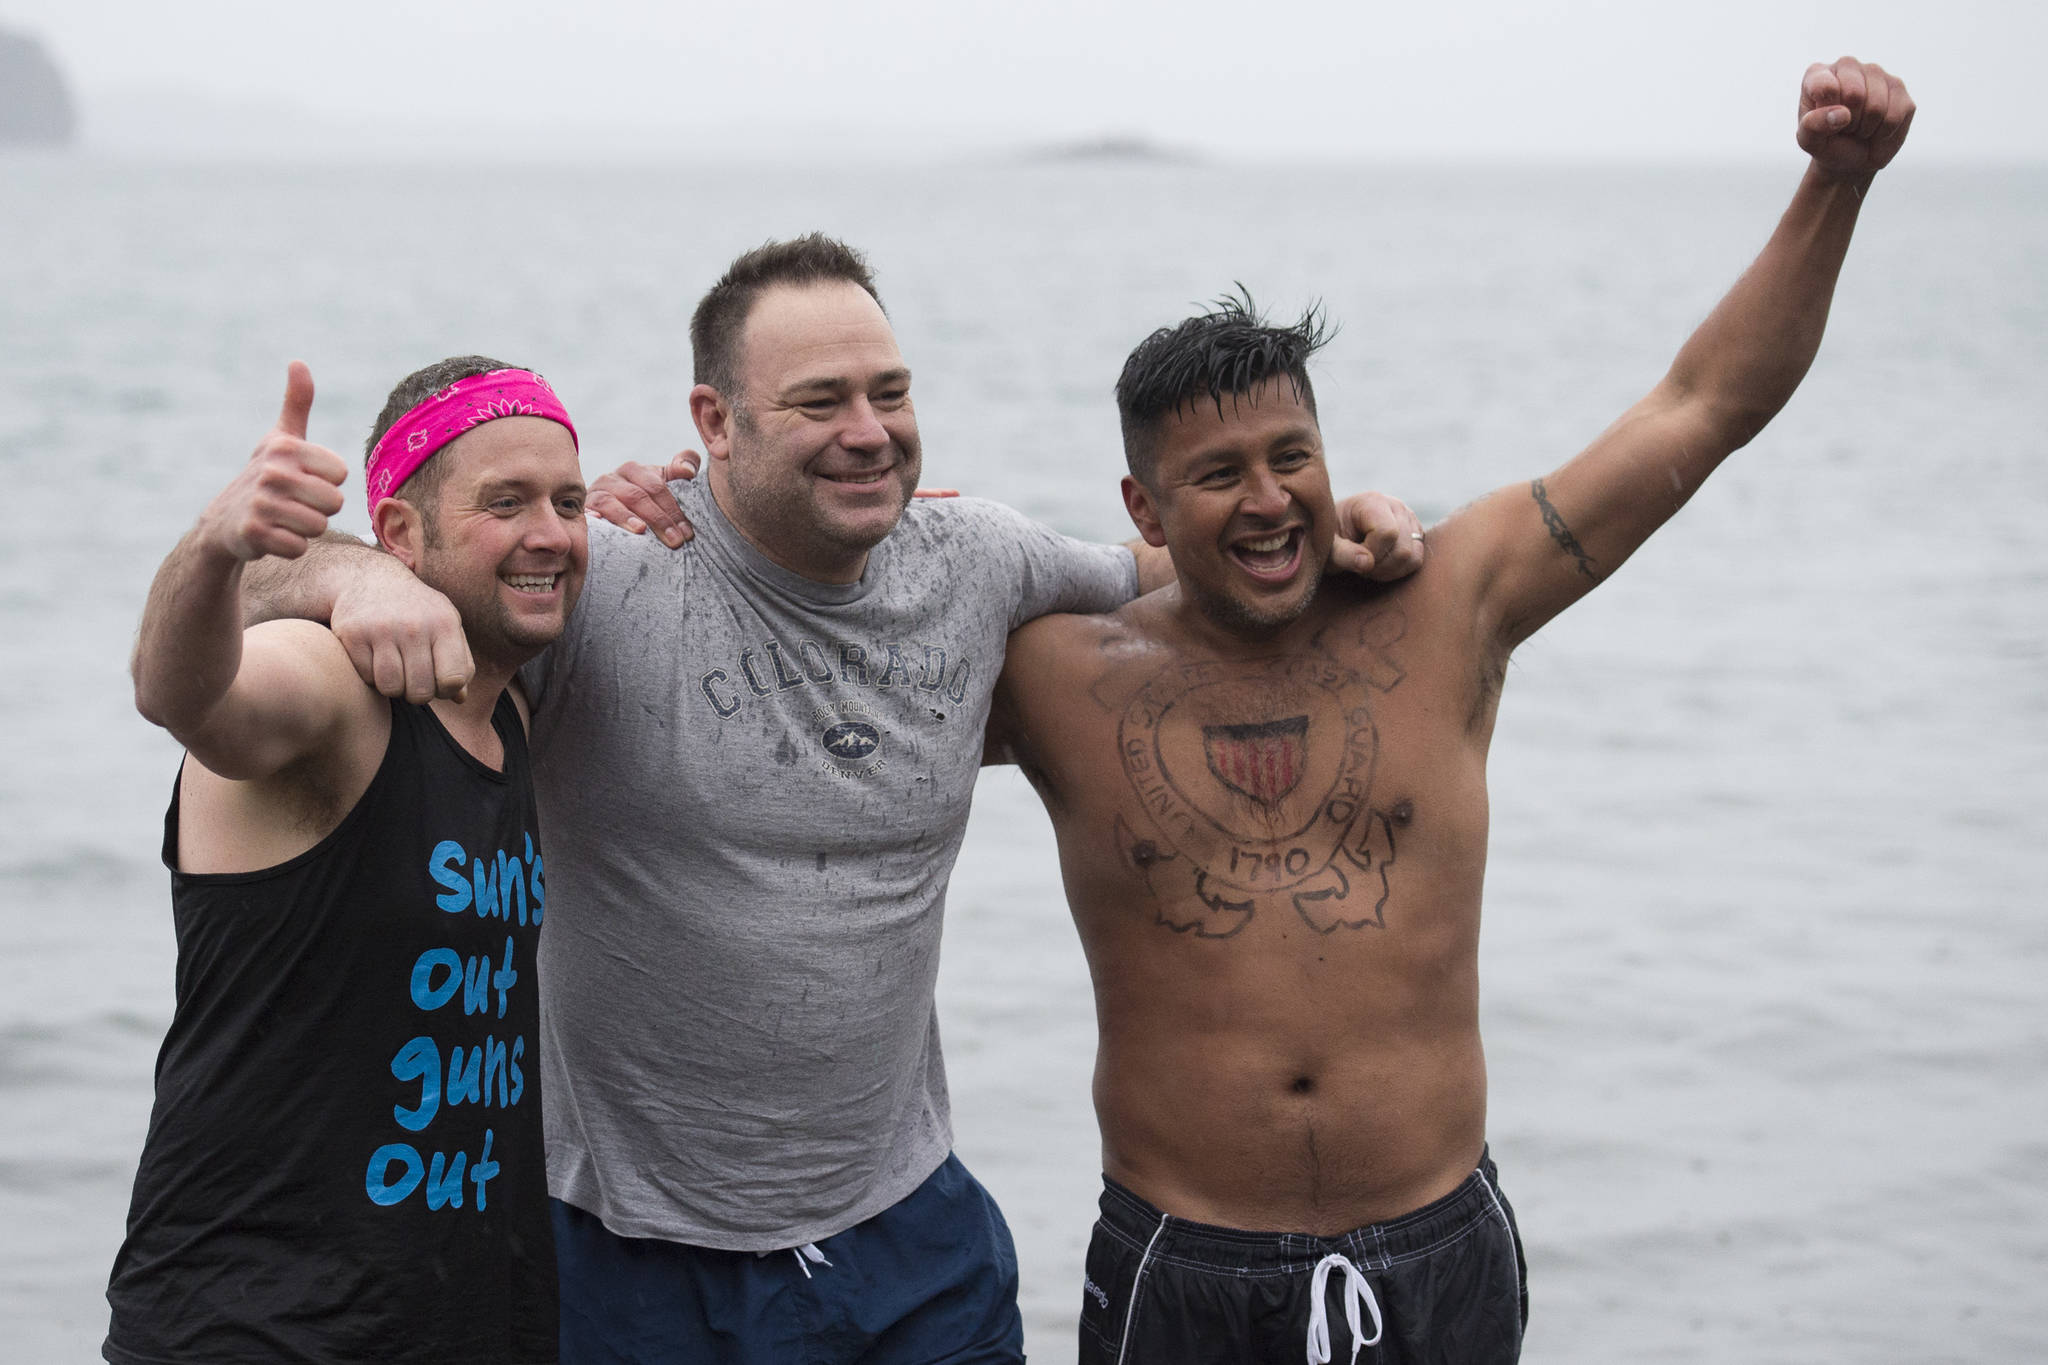 U.S. Coast Guard members John Dale, left, Chris Coutu, center, and Marvin Pena pose for a picture before taking to the frigid waters at Auke Bay Recreation Area for the annual Juneau Polar Bear Dip on Tuesday, Jan. 1, 2019. Nearly 200 people took the plunge to start off the new year. (Michael Penn | Juneau Empire)